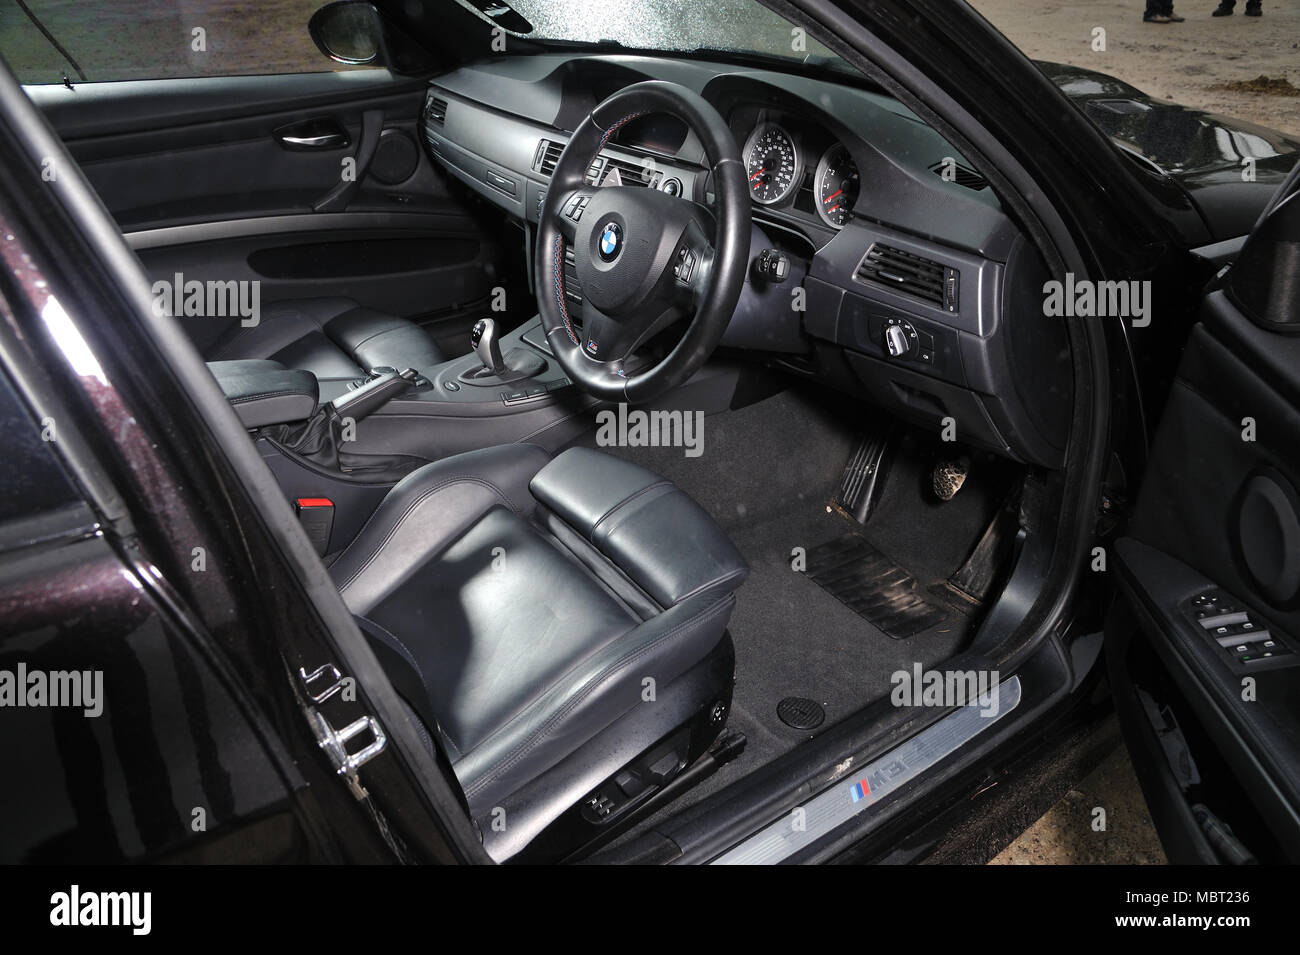 E92 BMW M3 sports saloon car, all black 'murdered out' look Stock Photo